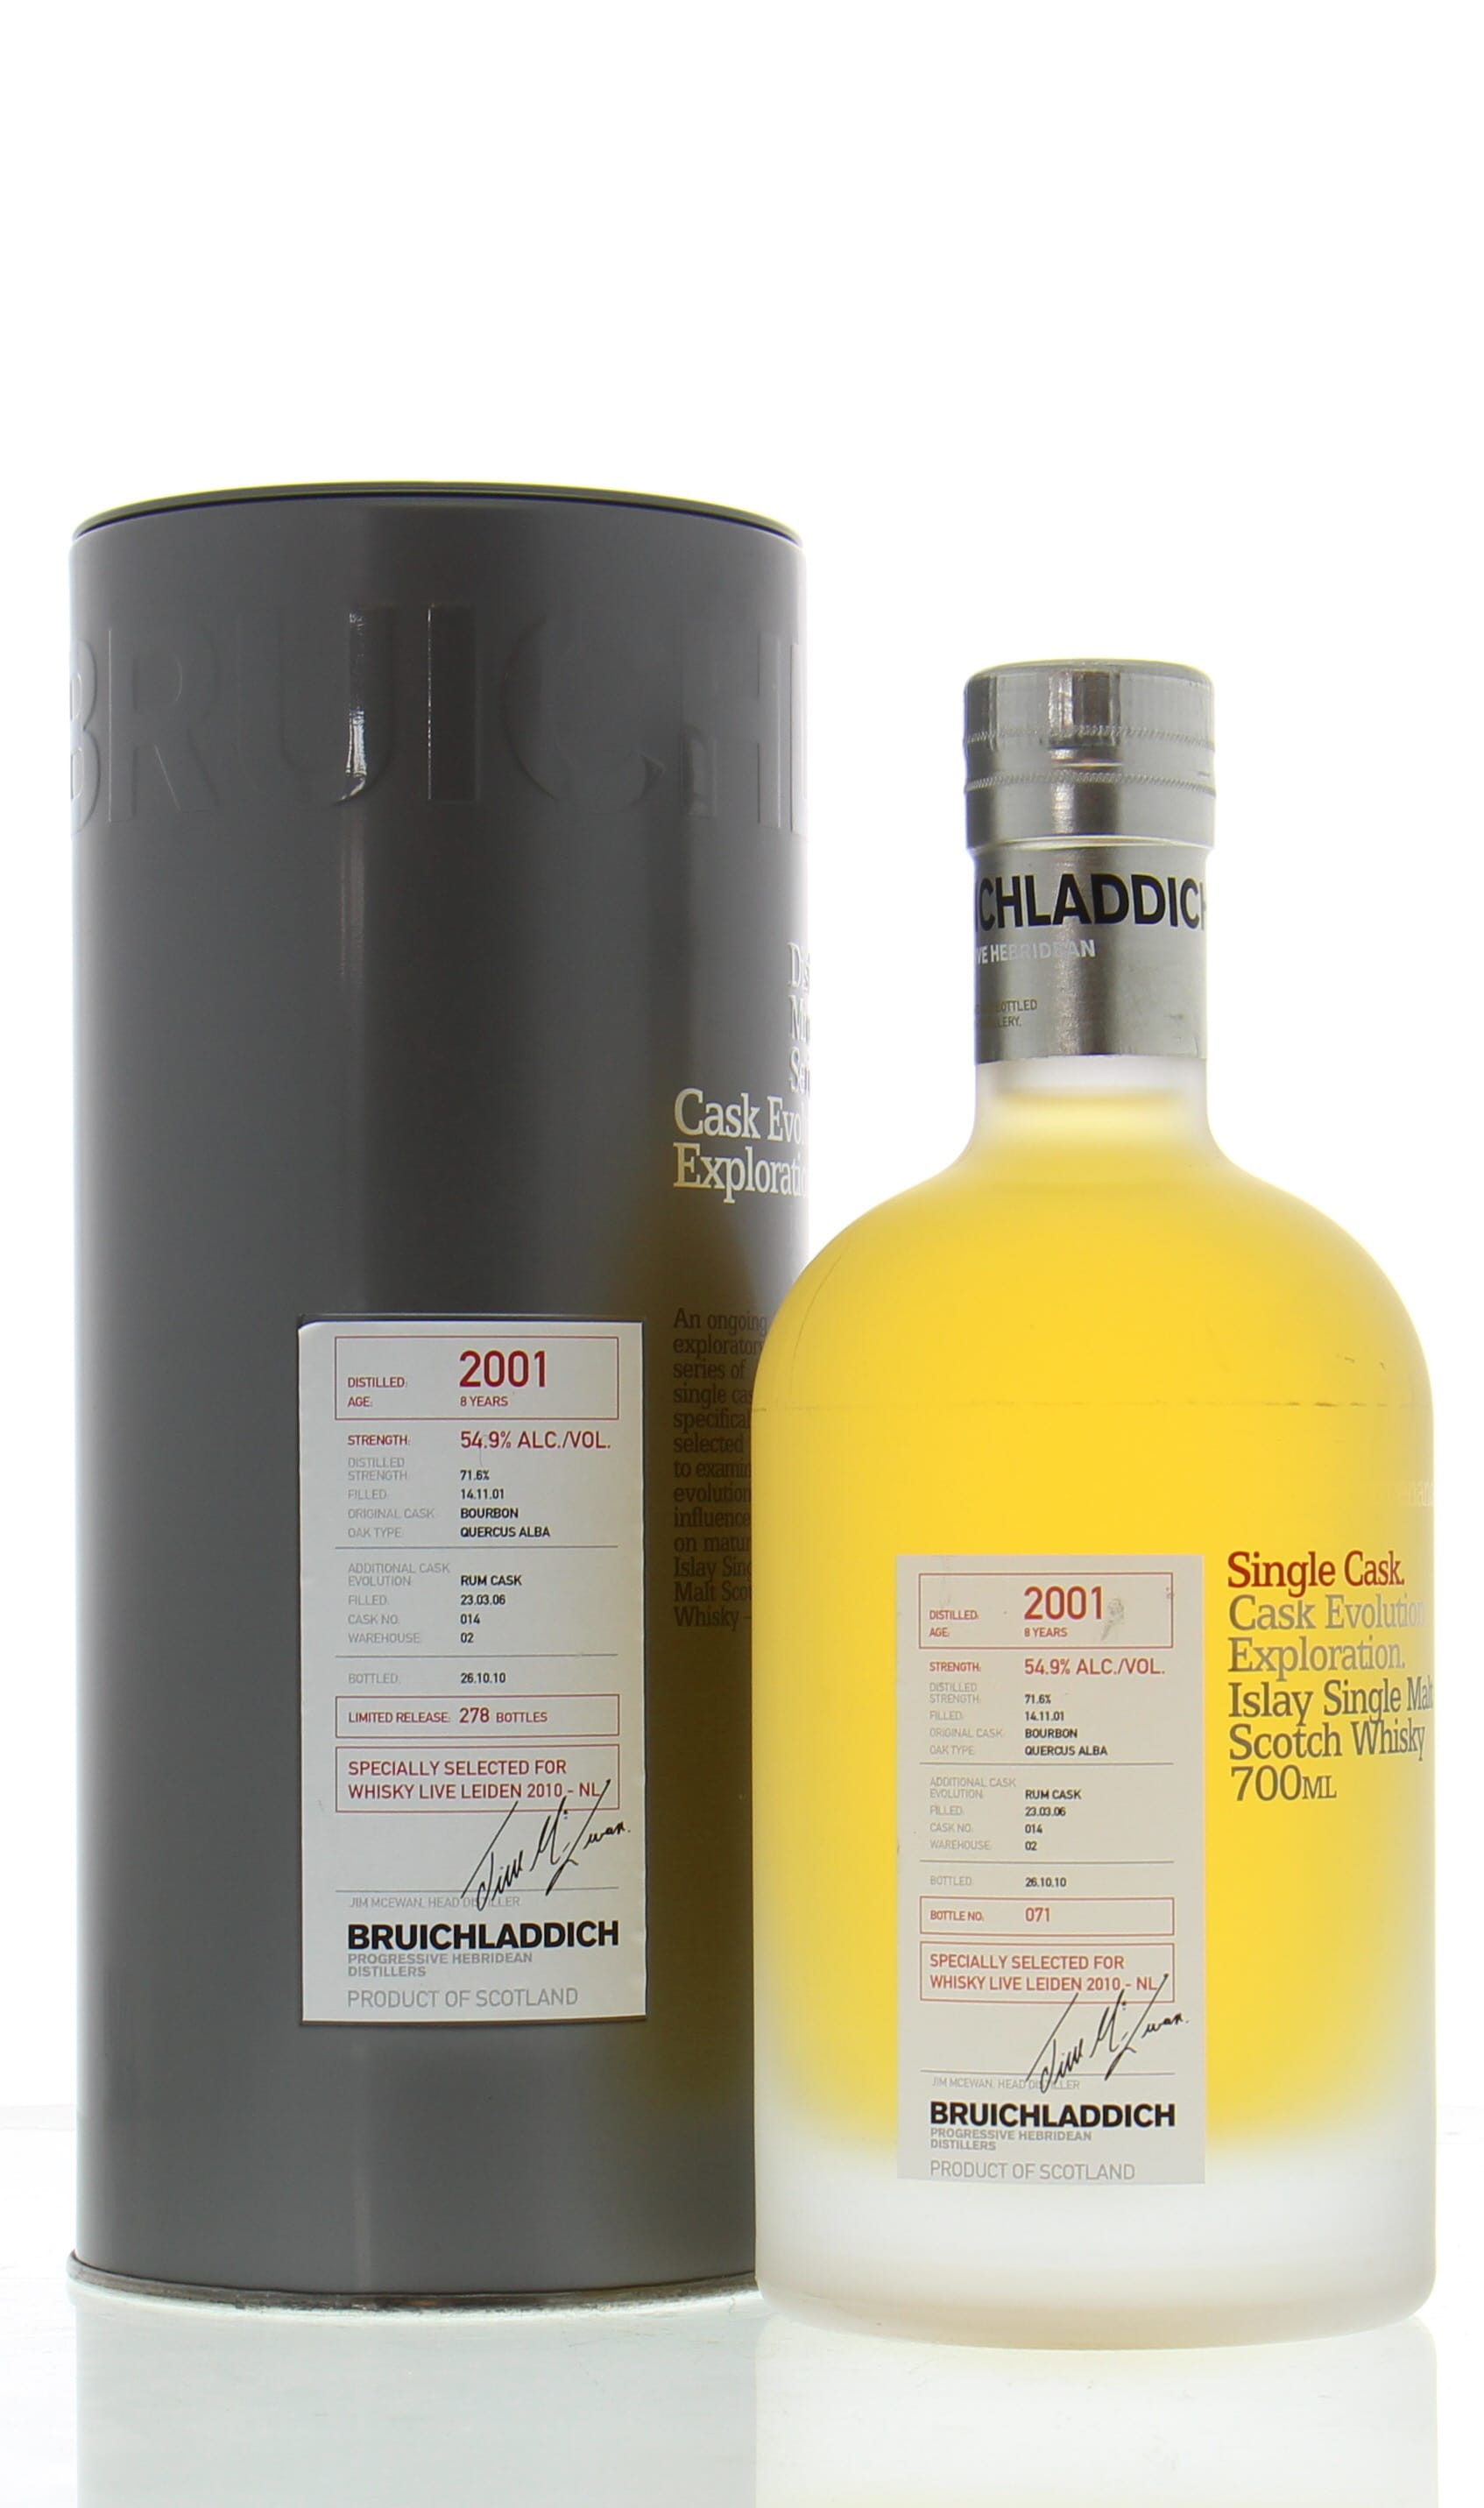 Bruichladdich - 8 Years Old Micro Provenance Series for Whisky Live Leiden Cask:014 54.9% 2001 In Original Container